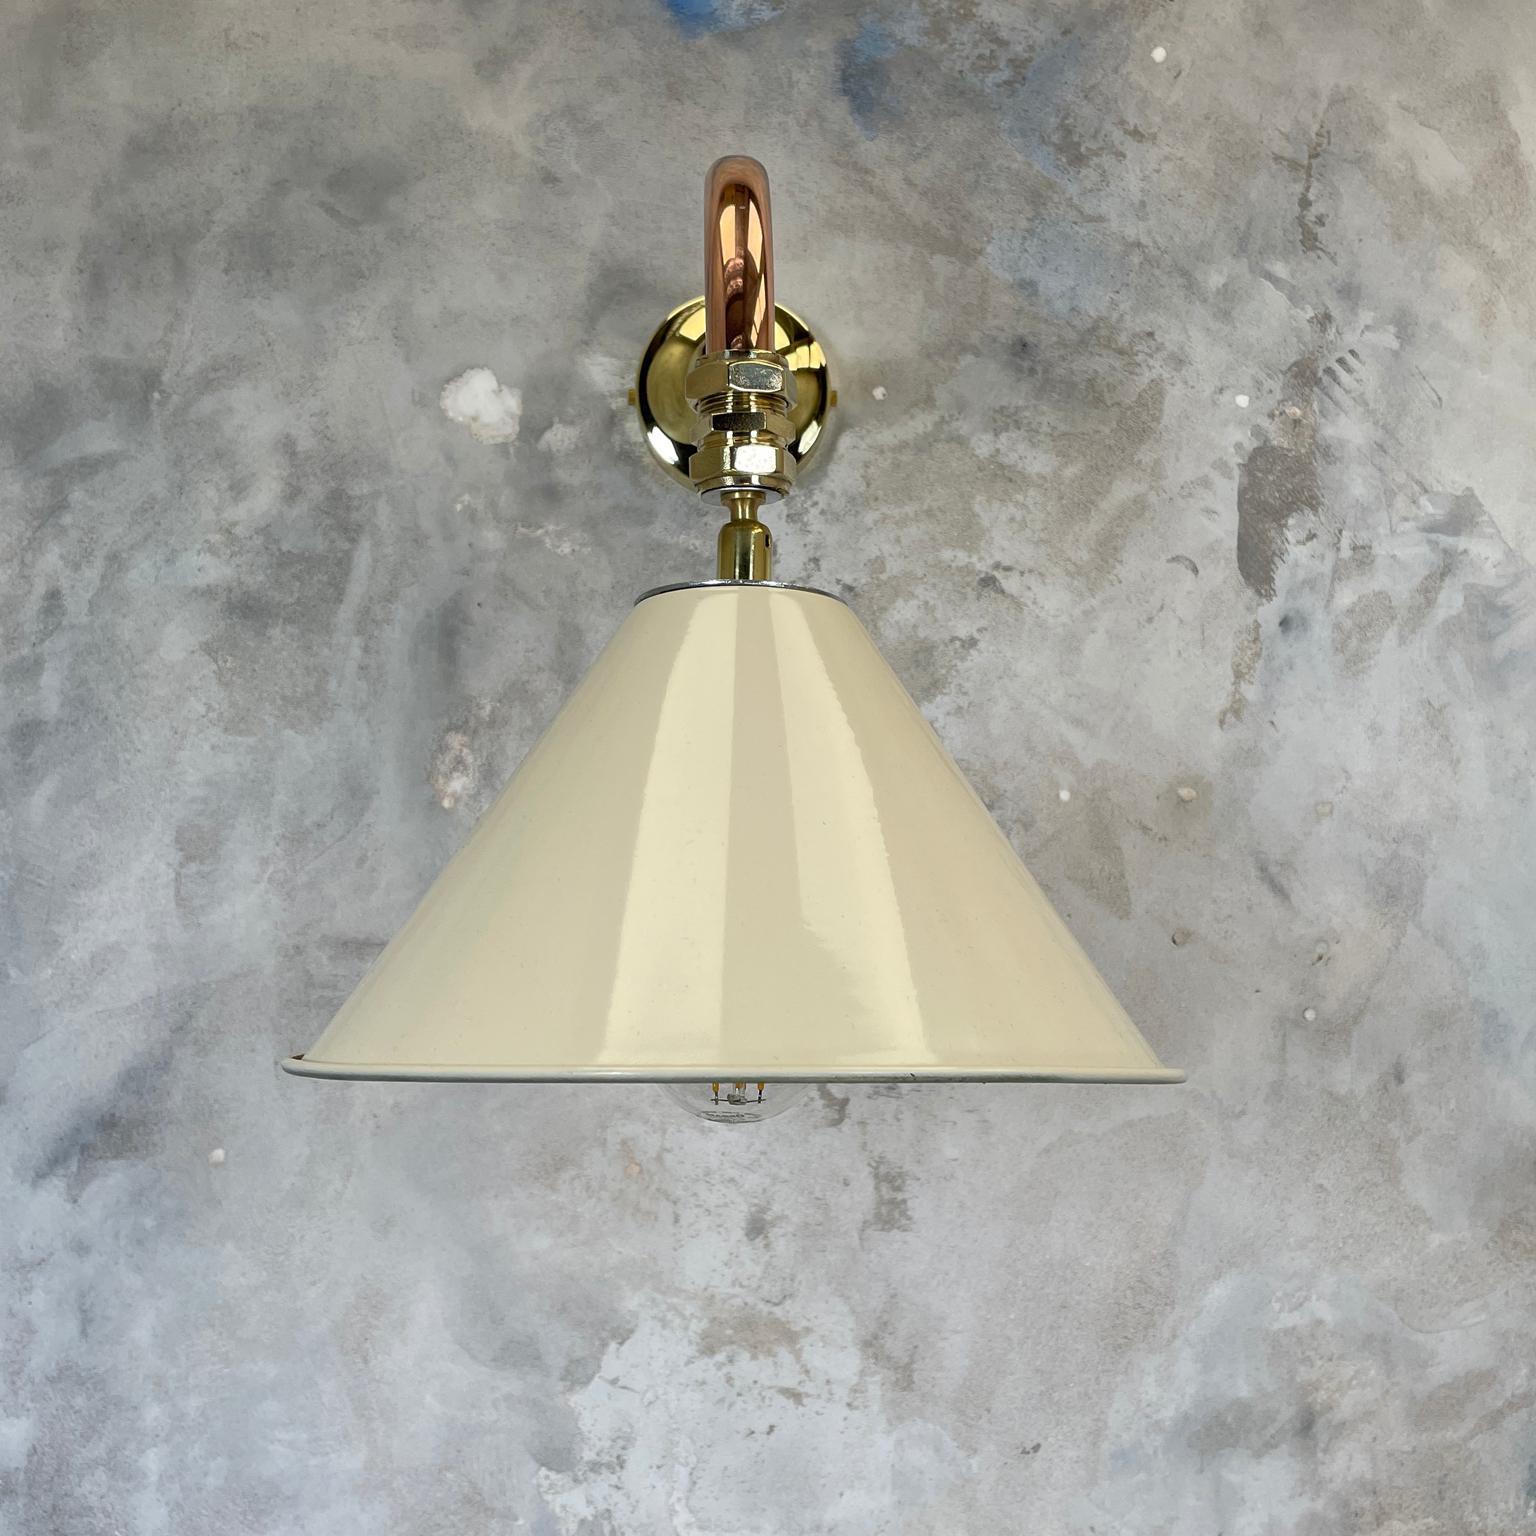 1980's Copper & Brass Cantilever Lamp Cream British Army Lamp Shade For Sale 12